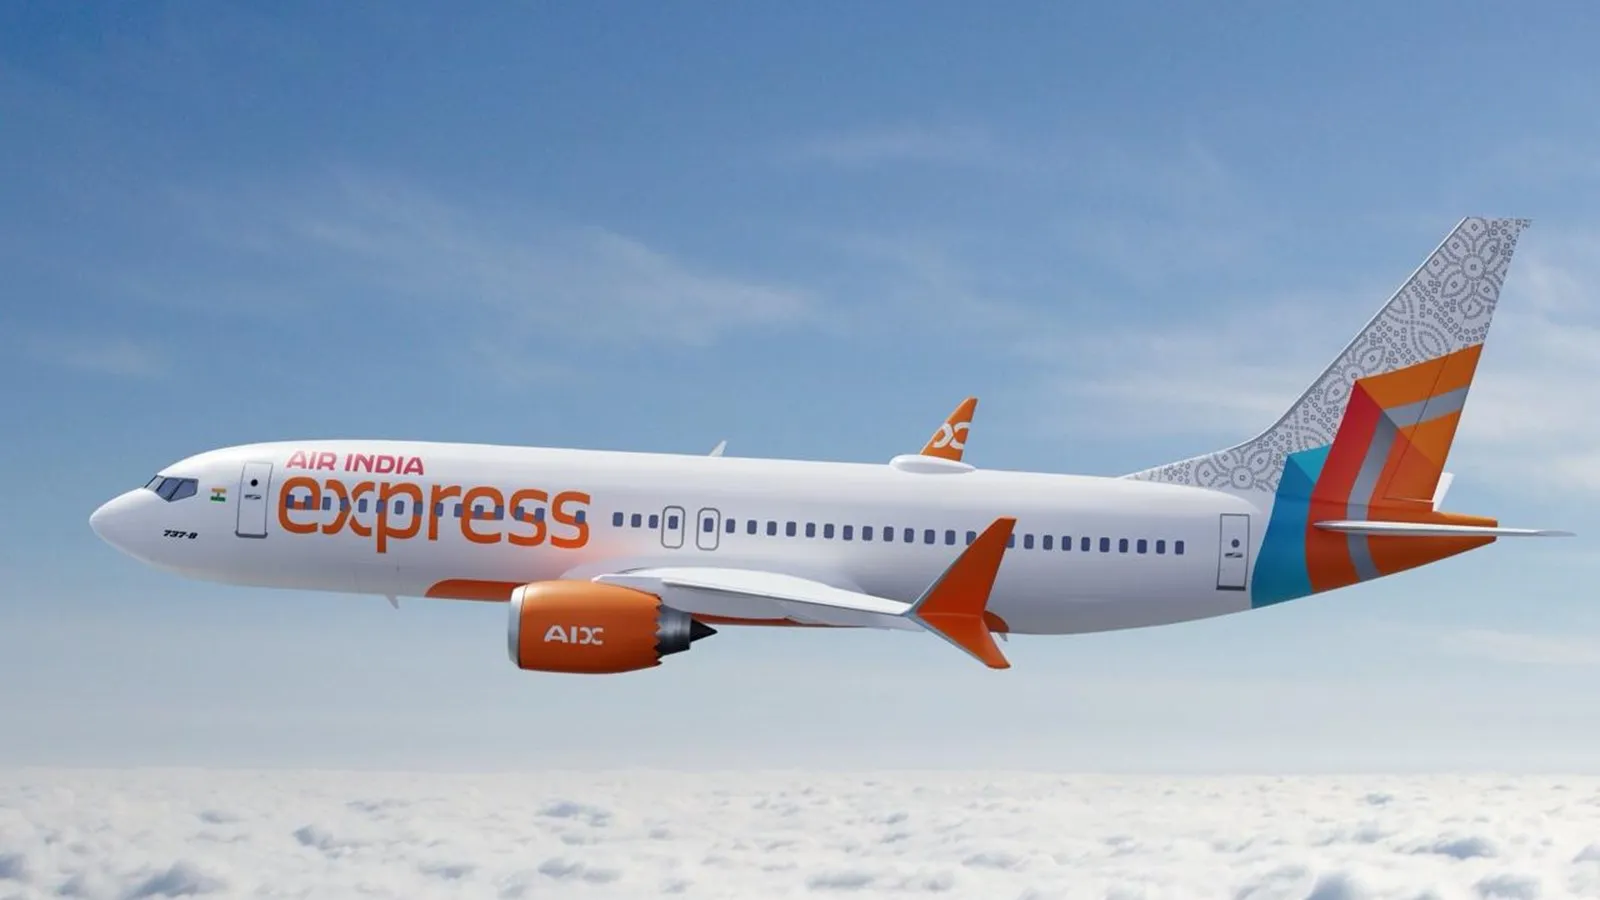 Air India Express Boeing - Aviation in Nepal